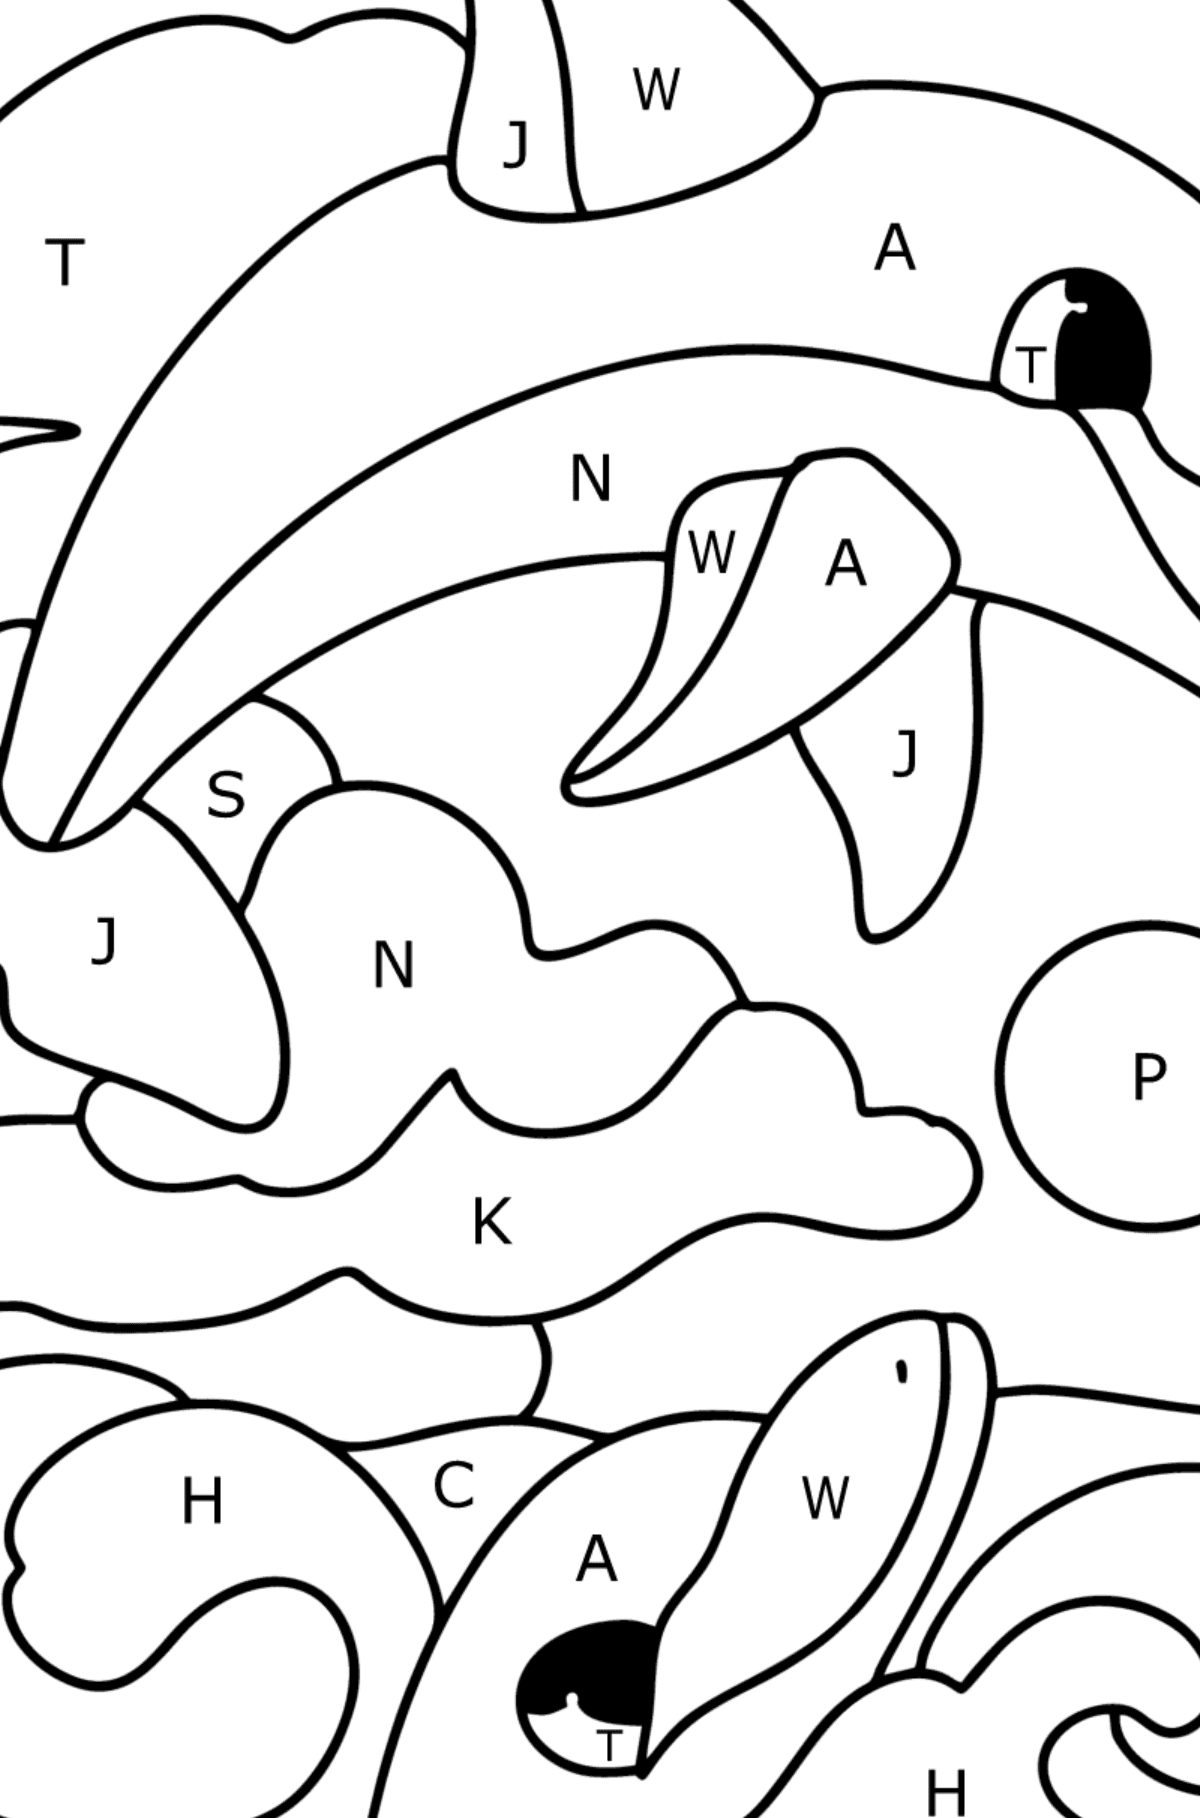 Dolphins coloring page - Coloring by Letters for Kids